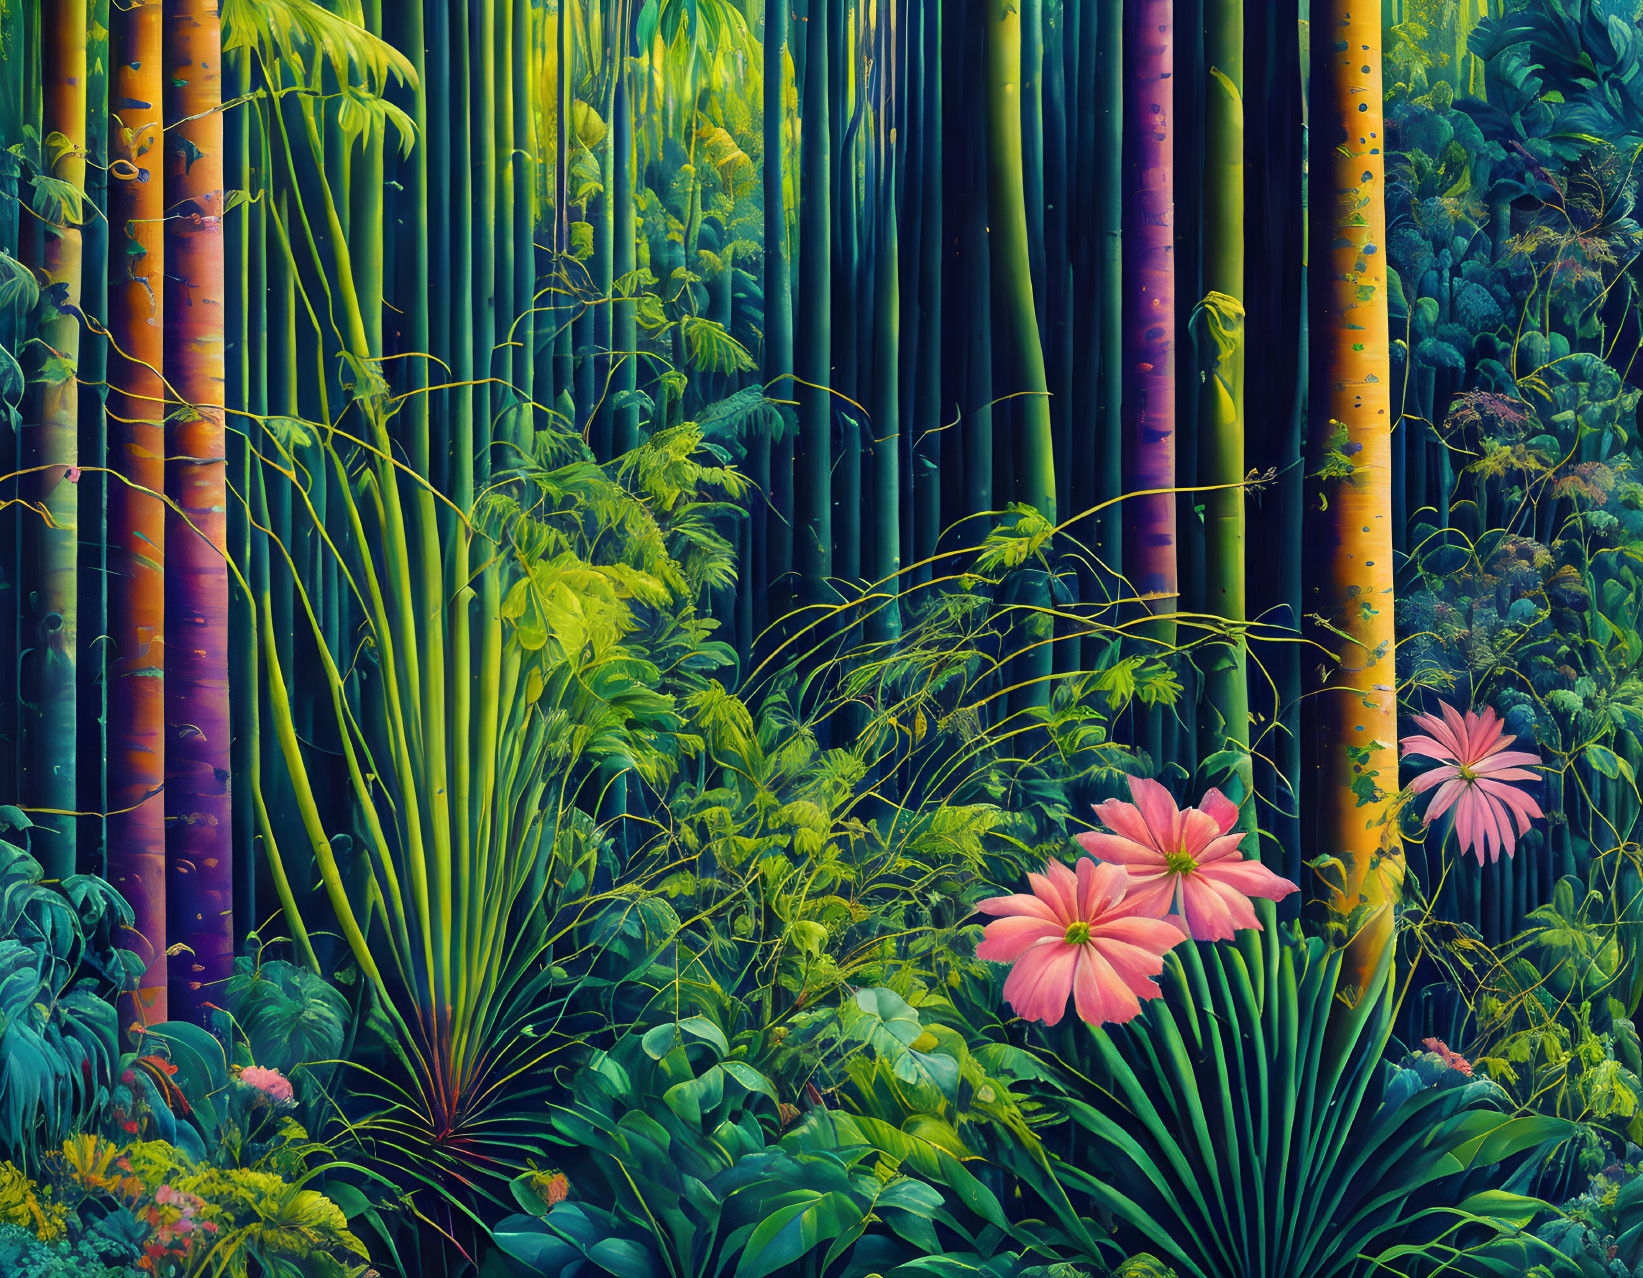 Colorful Bamboo Forest with Pink Flowers and Greenery